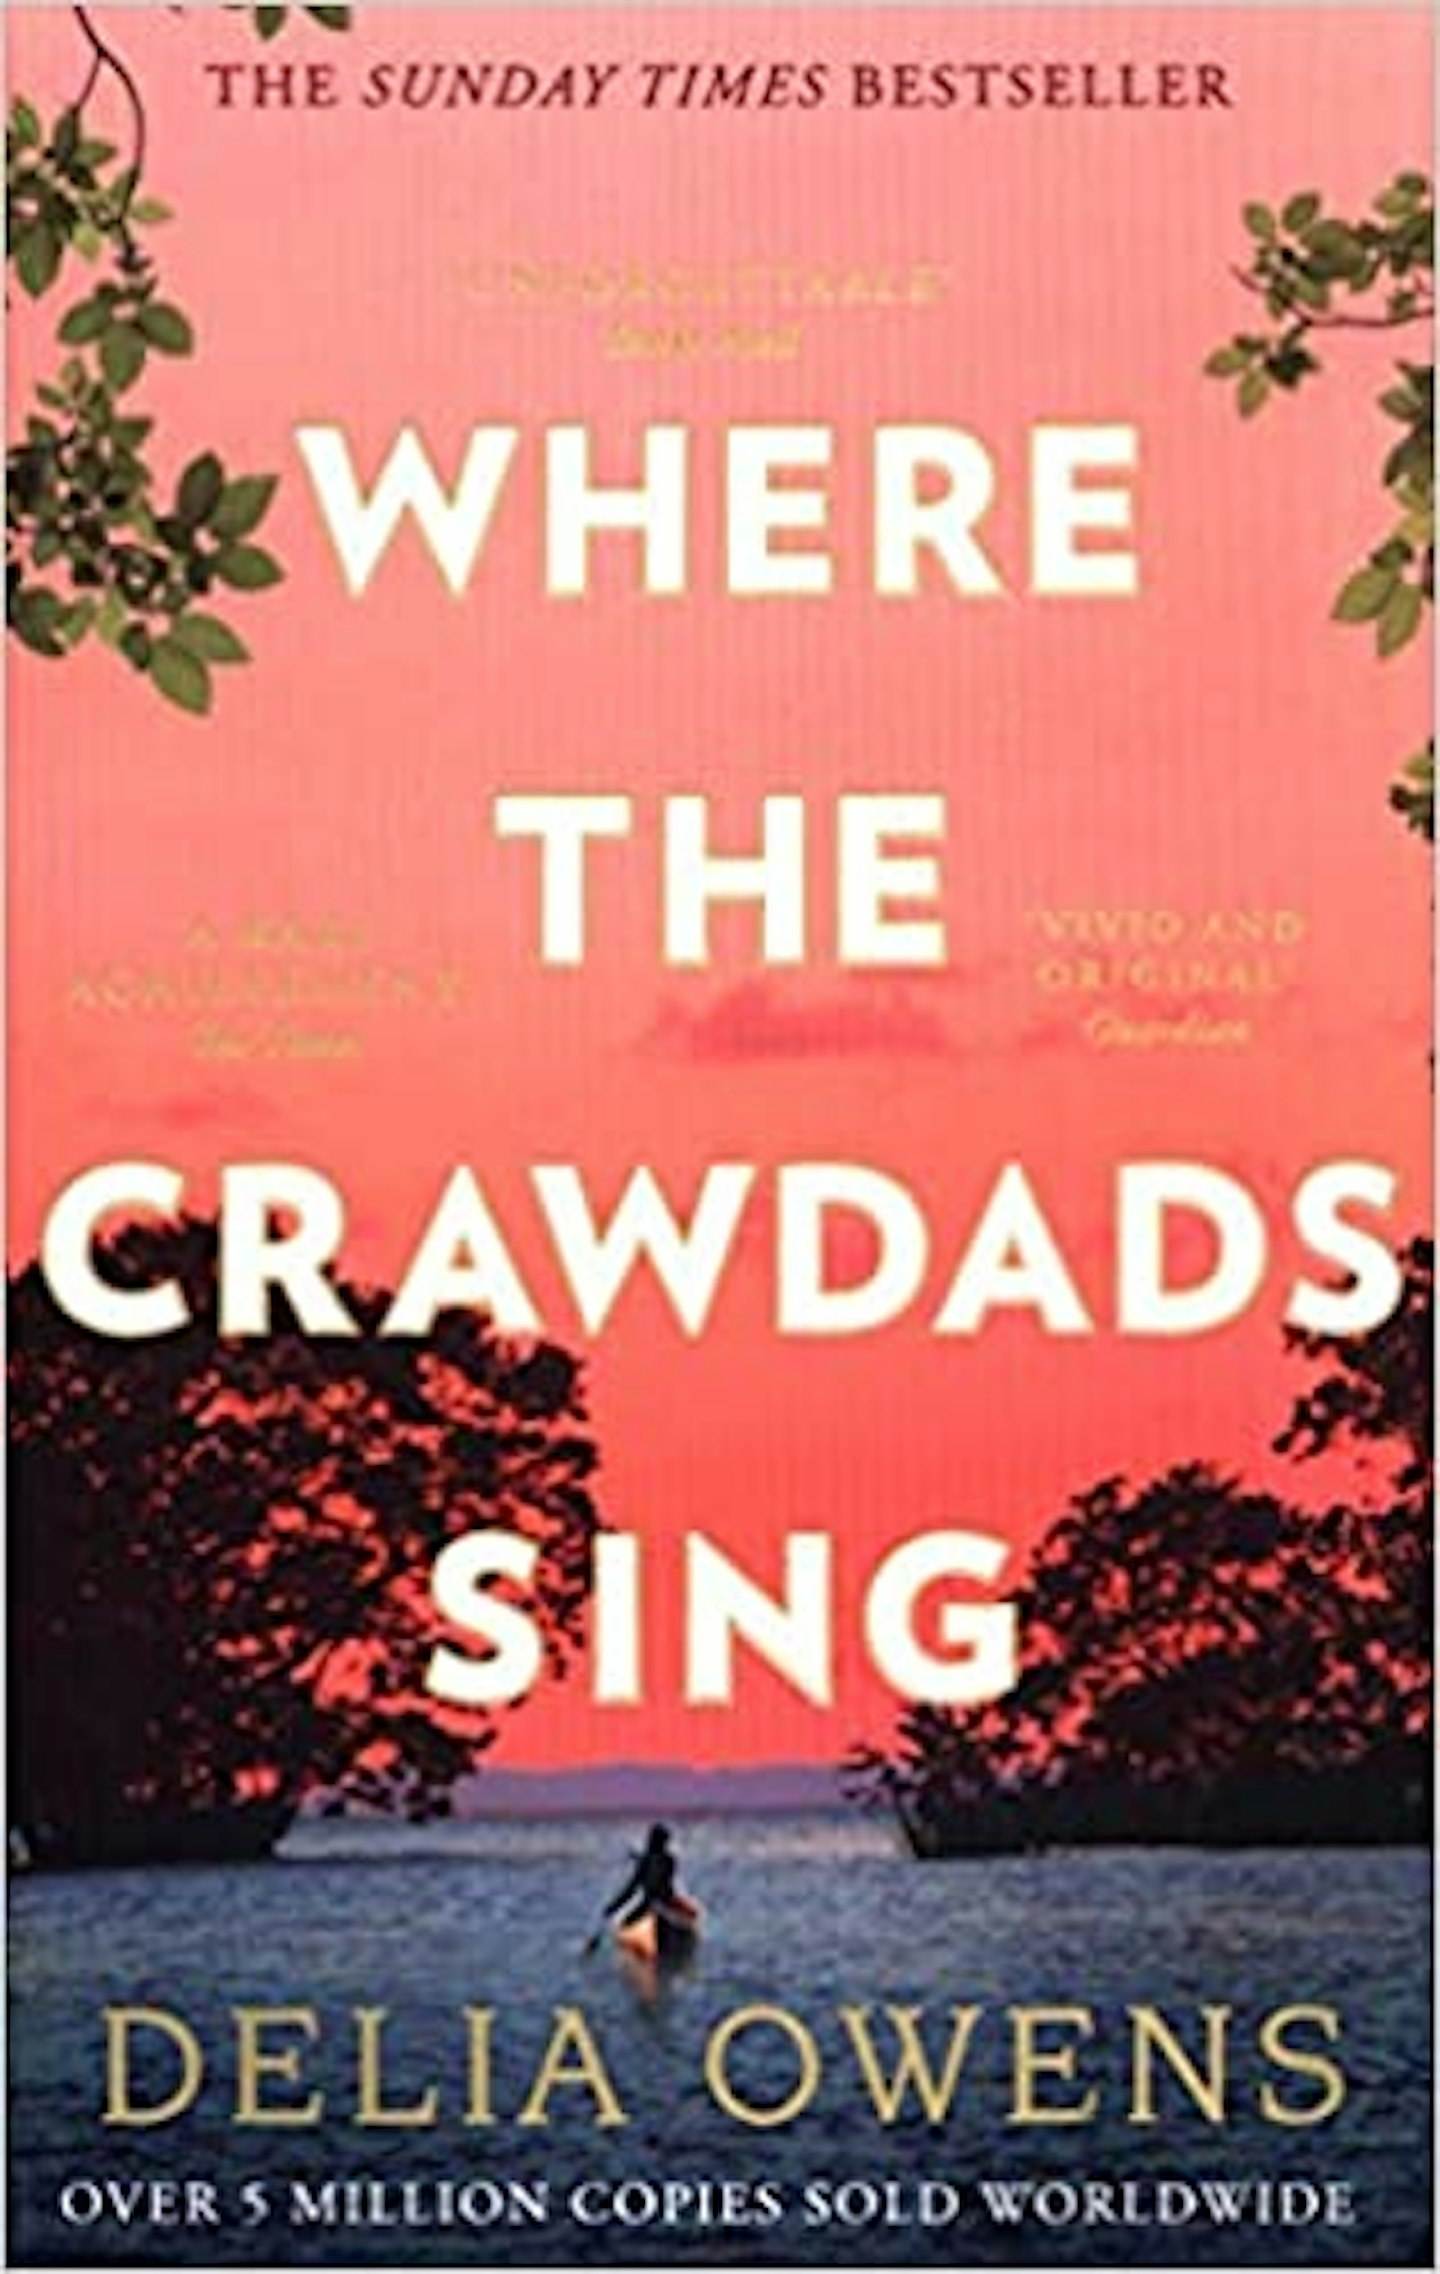 Where the Crawdads Sing by Delia Owens